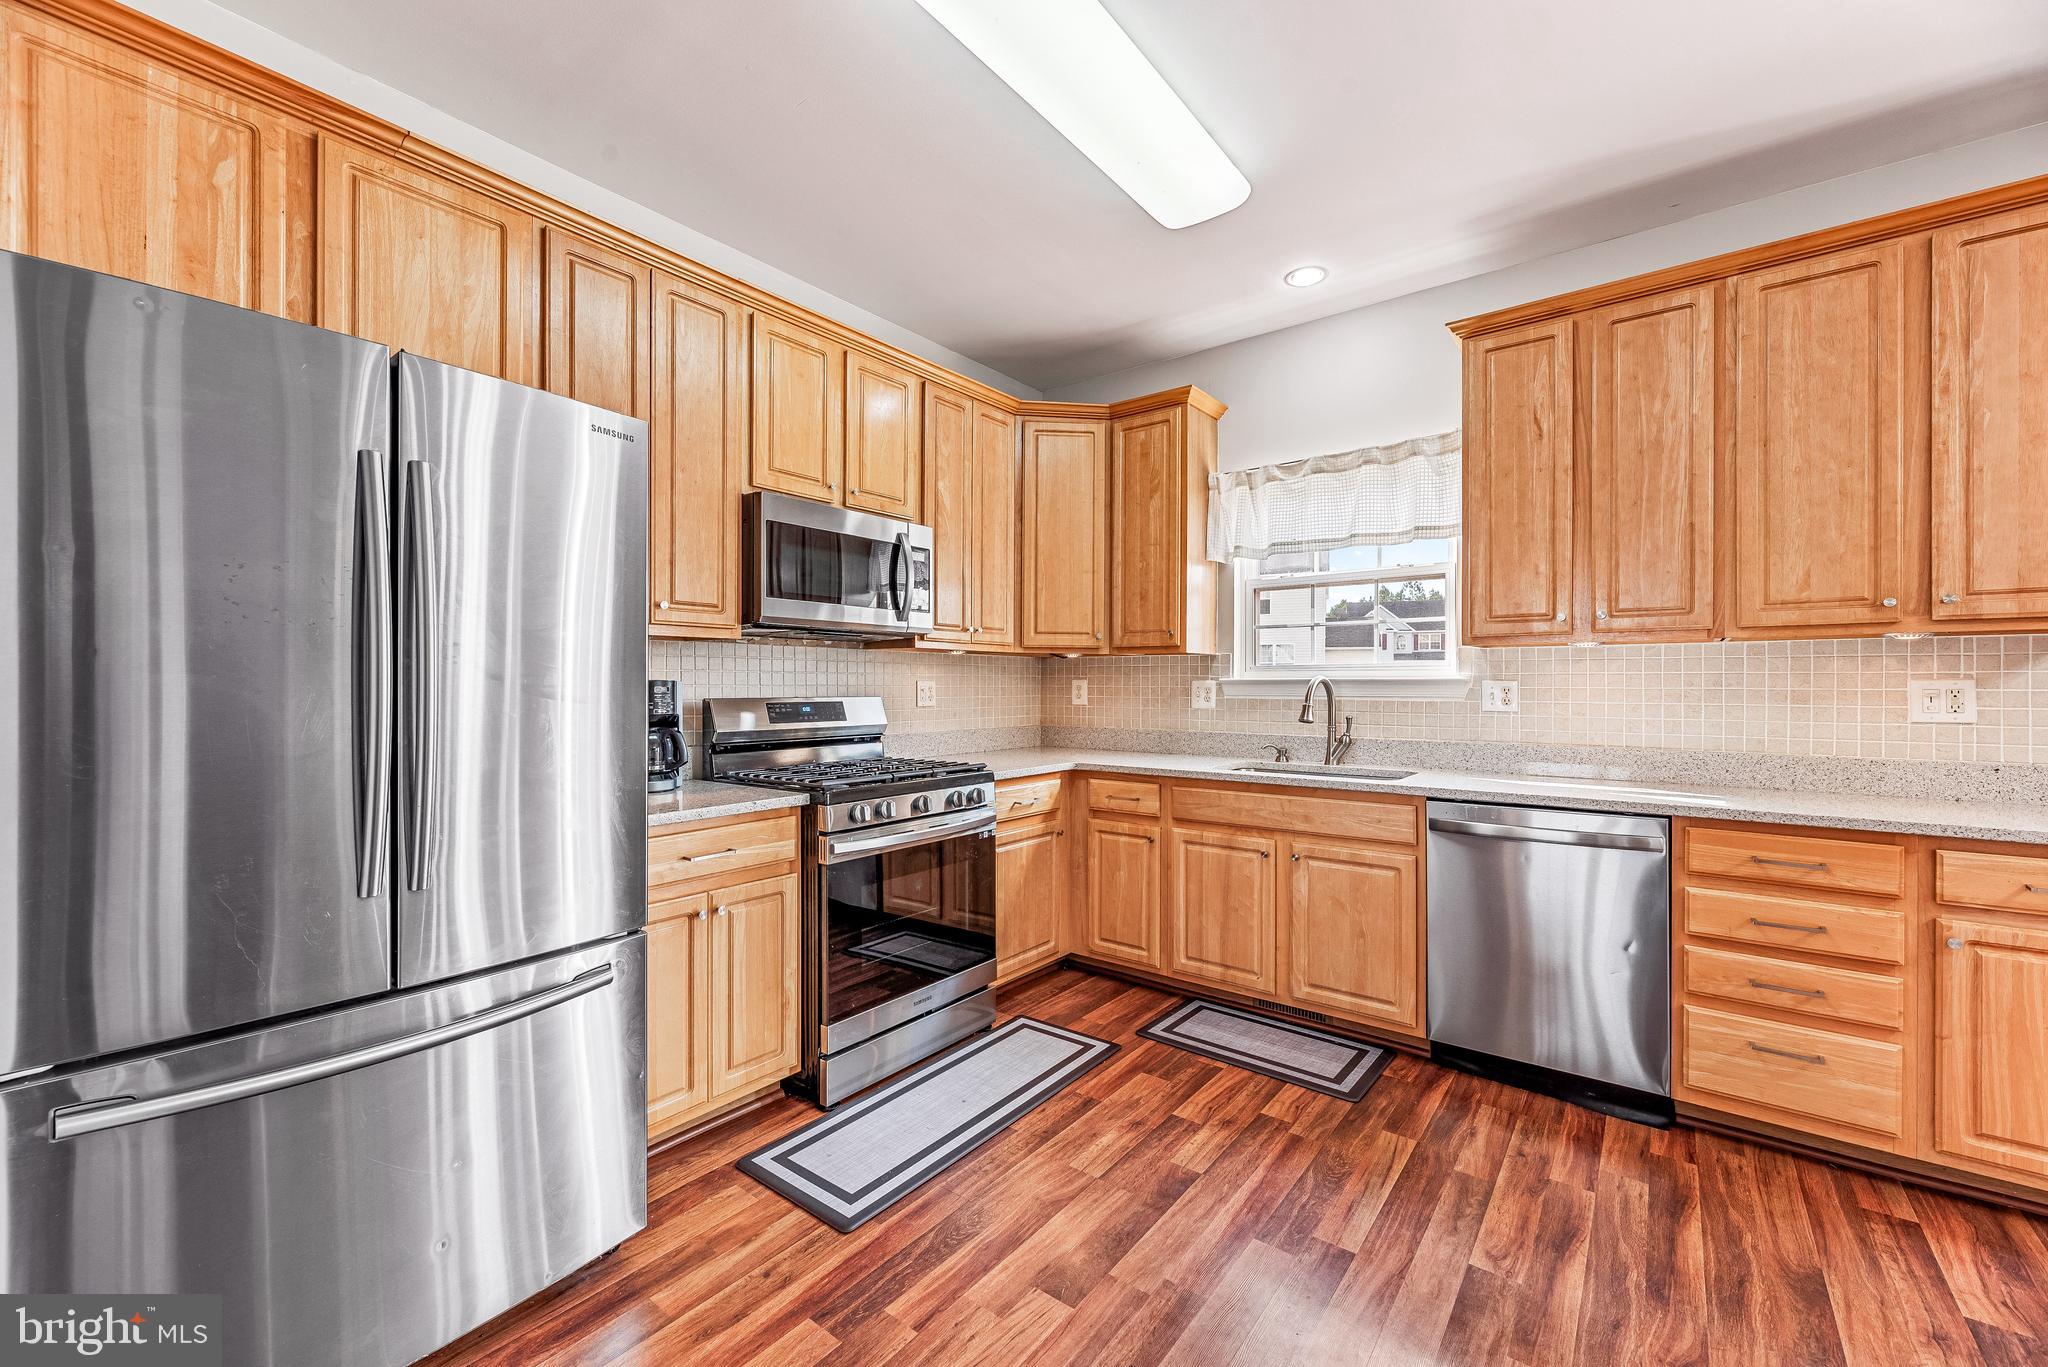 a kitchen with granite countertop wooden floors stainless steel appliances and window